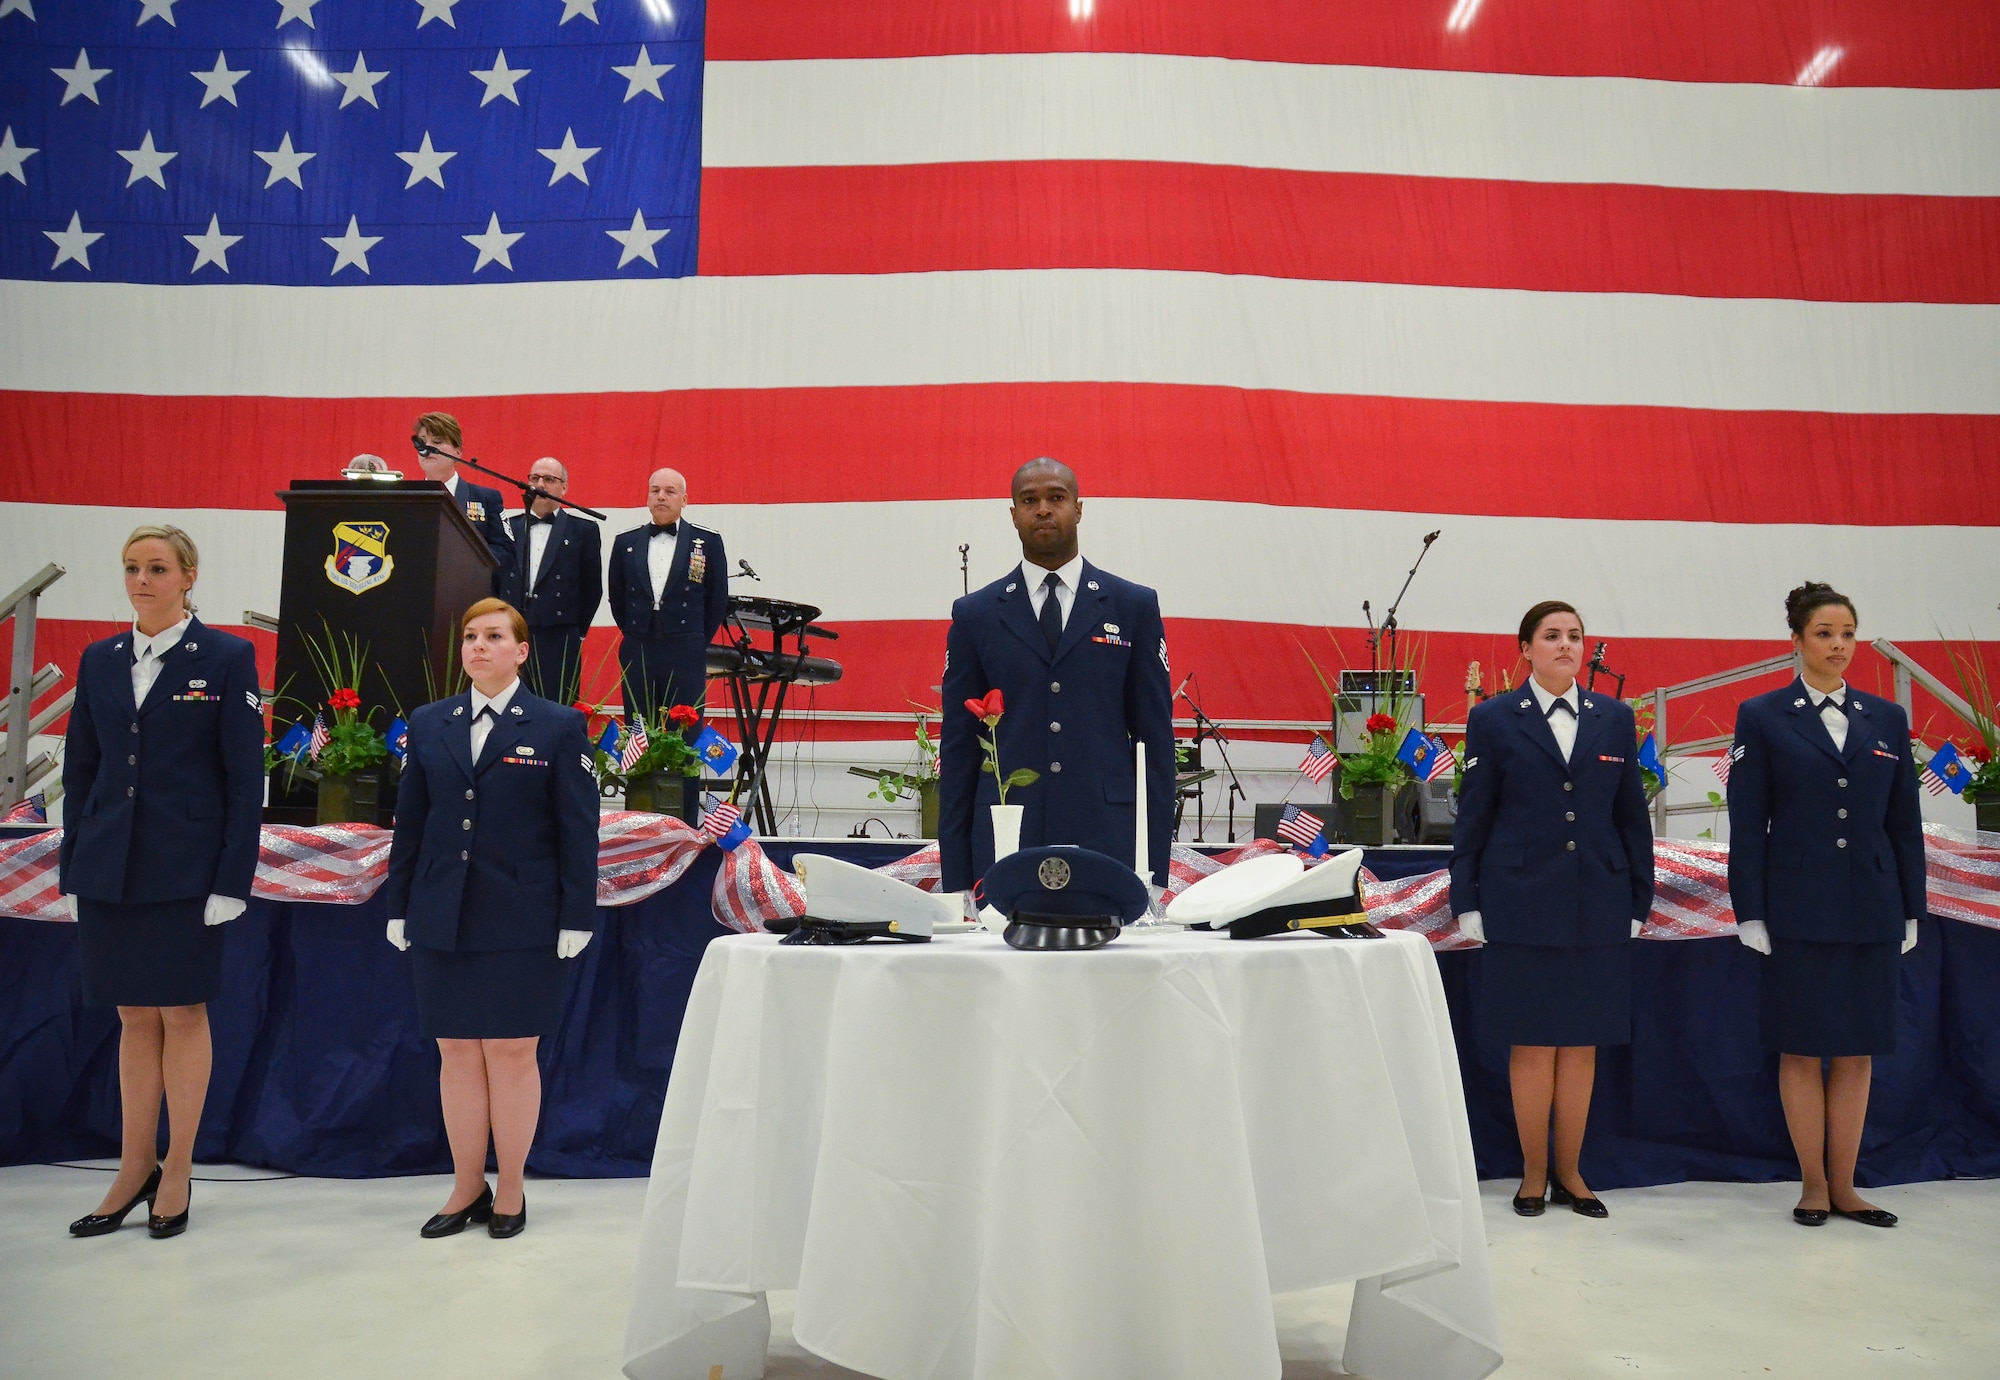 The Rising 6 Enlisted Council of the128th Air Refueling Wing performed the POW Missing Man Ceremony at the 35th annual Civic Dinner Dance in the aircraft hangar here May 14, 2015.  The Civic Dinner Dance is an event coordinated by the Milwaukee Armed Forces Committee for Wisconsin military members, elected state and local officials, and citizens of the local Milwaukee area to celebrate community relations during Armed Forces Week.  (U.S. Air National Guard photo by Tech. Sgt. Jenna Lenski/Released)